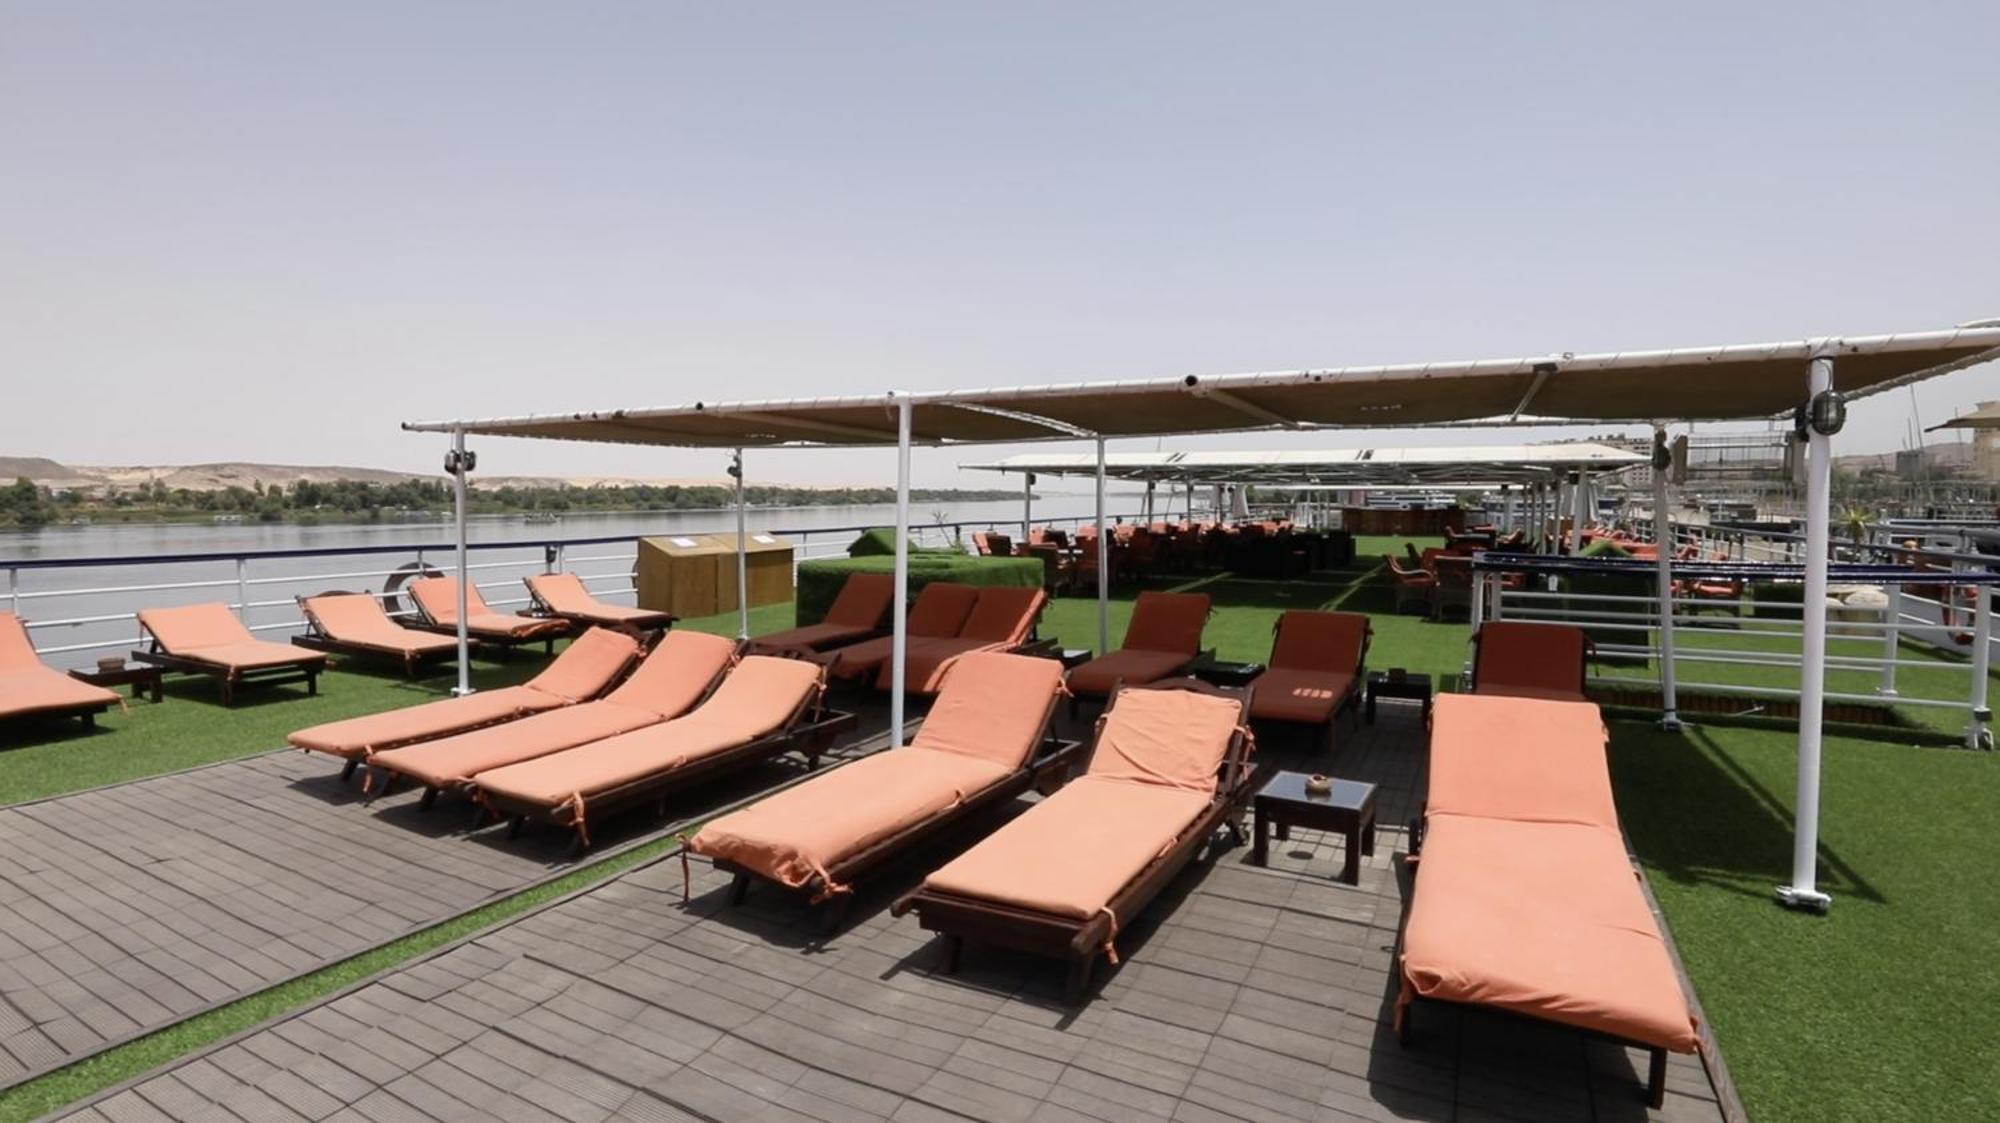 M/S Royal Adventure - Saturday From Luxor 4 Or 7 Nights - Wednesday From Aswan 3 Or 7 Nights酒店 外观 照片